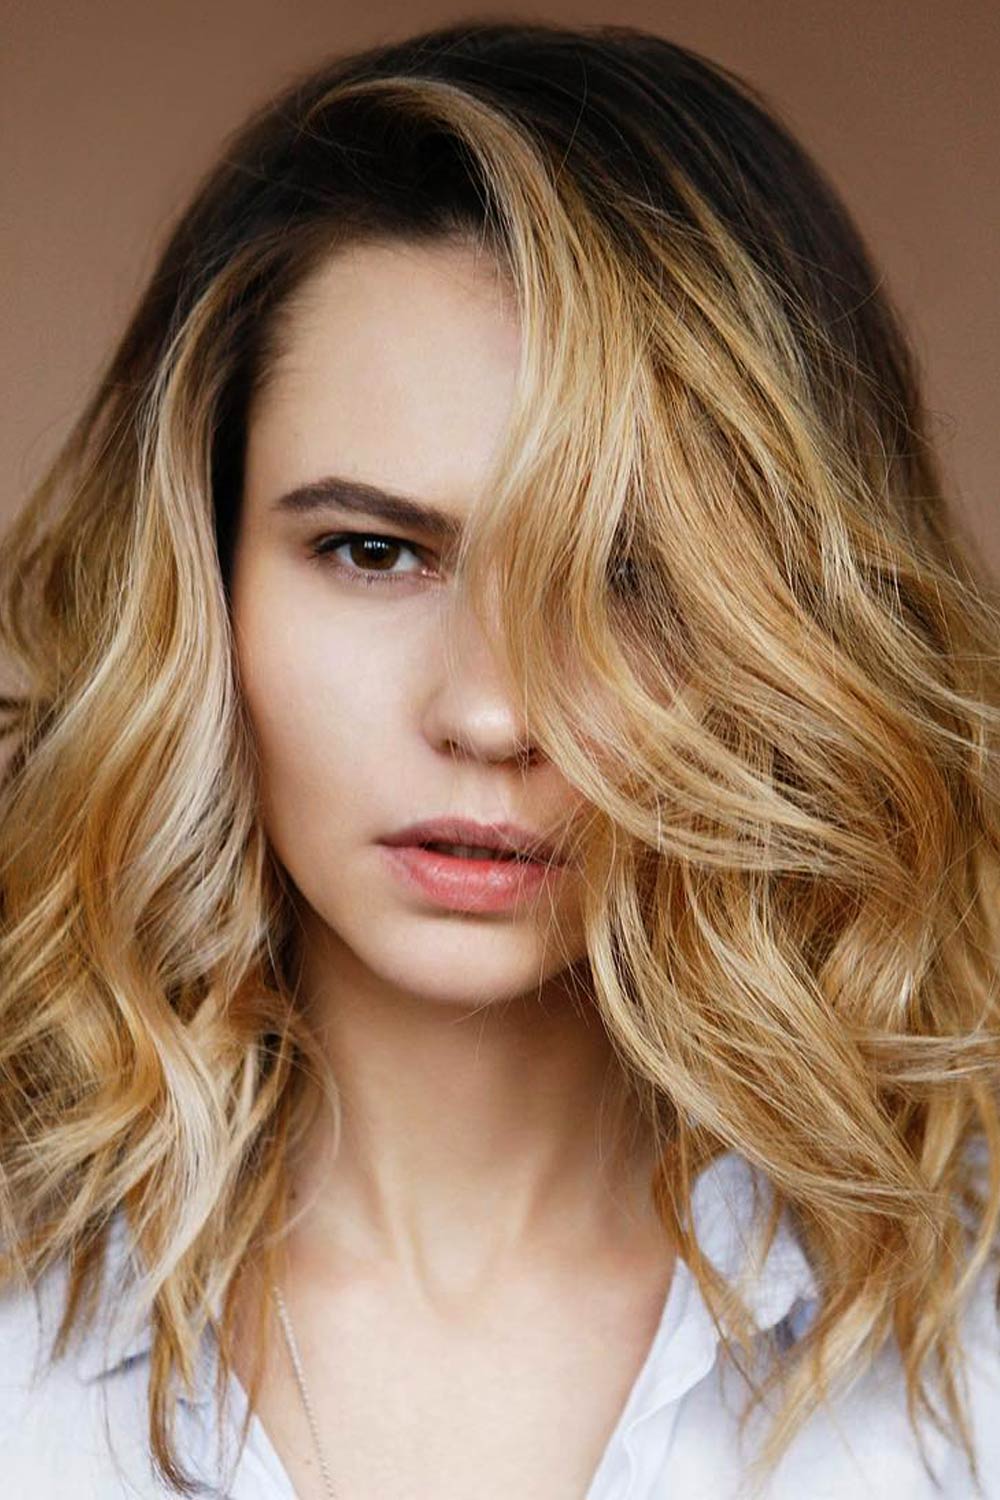 31 Flattering Hairstyles For Thin Hair - StyleSeat